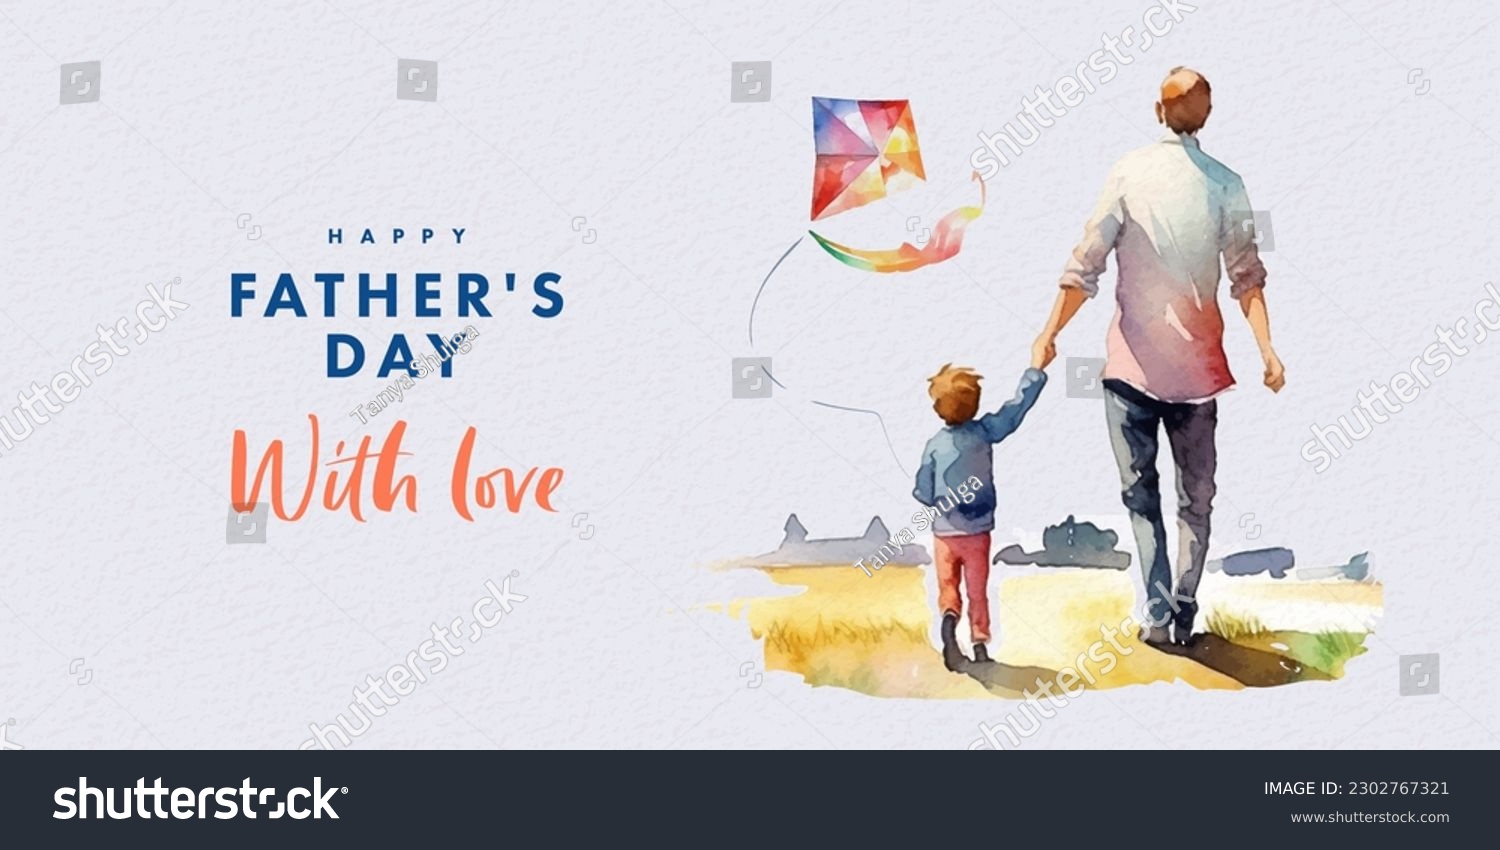 SVG of Fathers Day card with cute watercolor illustration of dad with son fly a kite and walking together, modern typography, holiday wishes. Father's Day templates for poster, cover, banner, social media svg